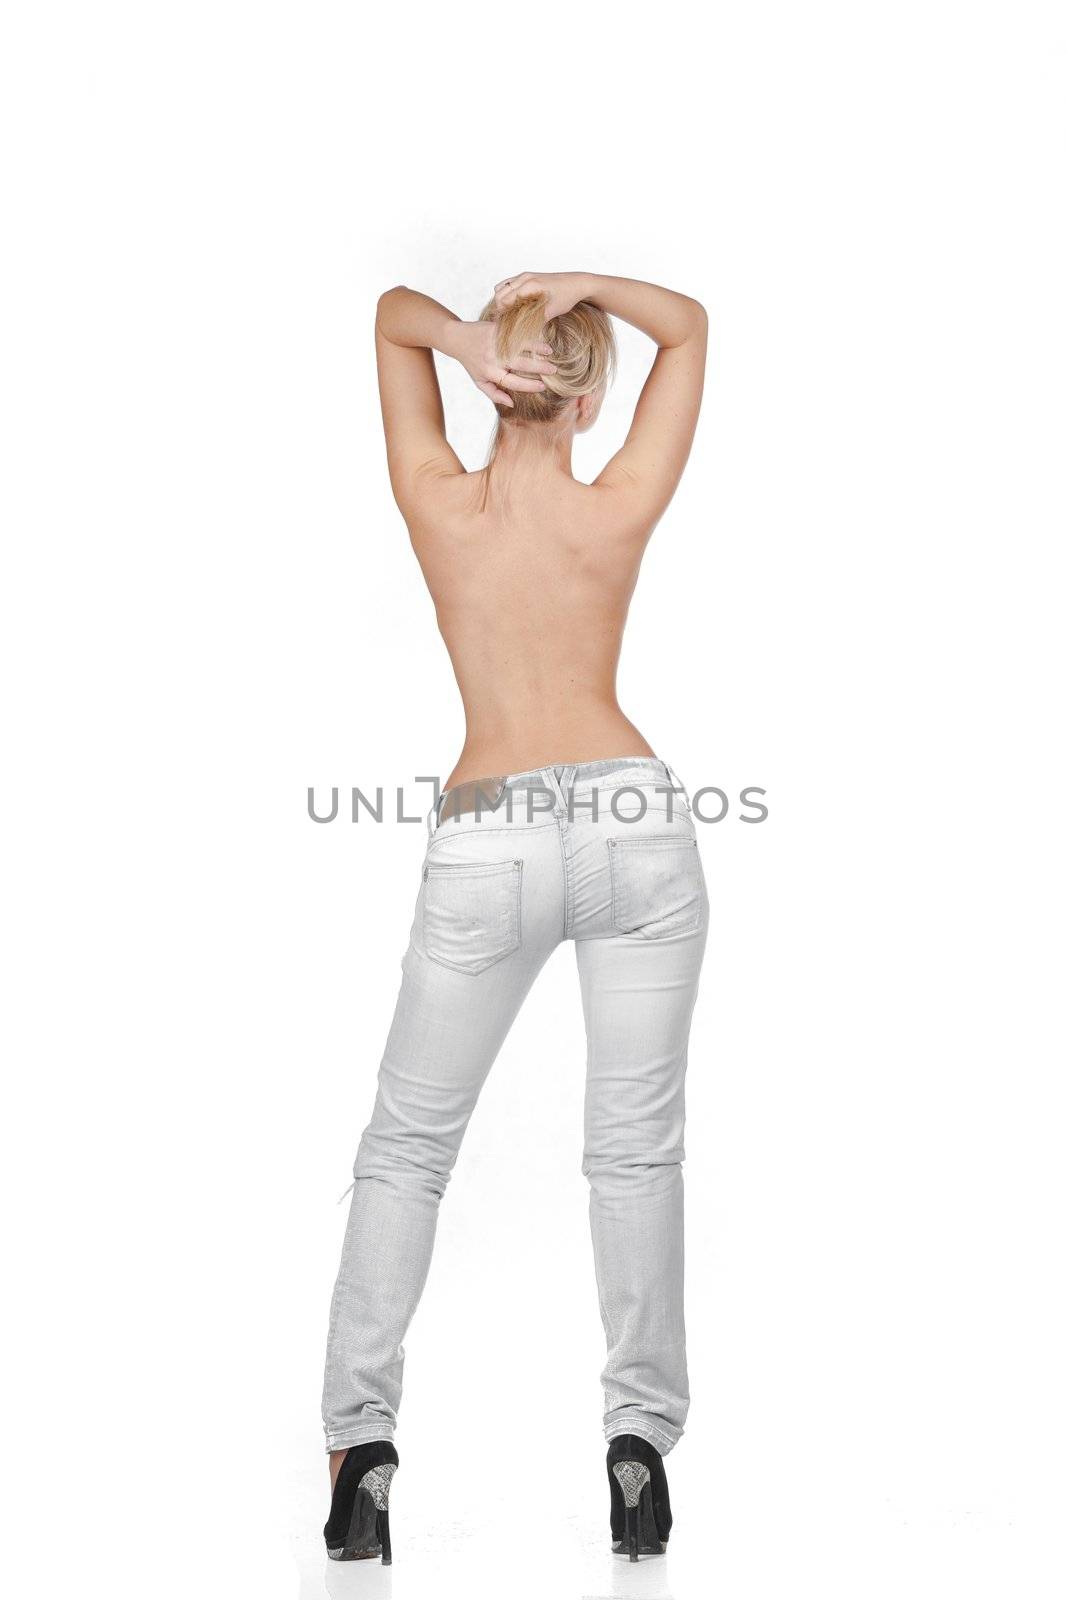 Sexy Female blonde shirtless in jeans Back view